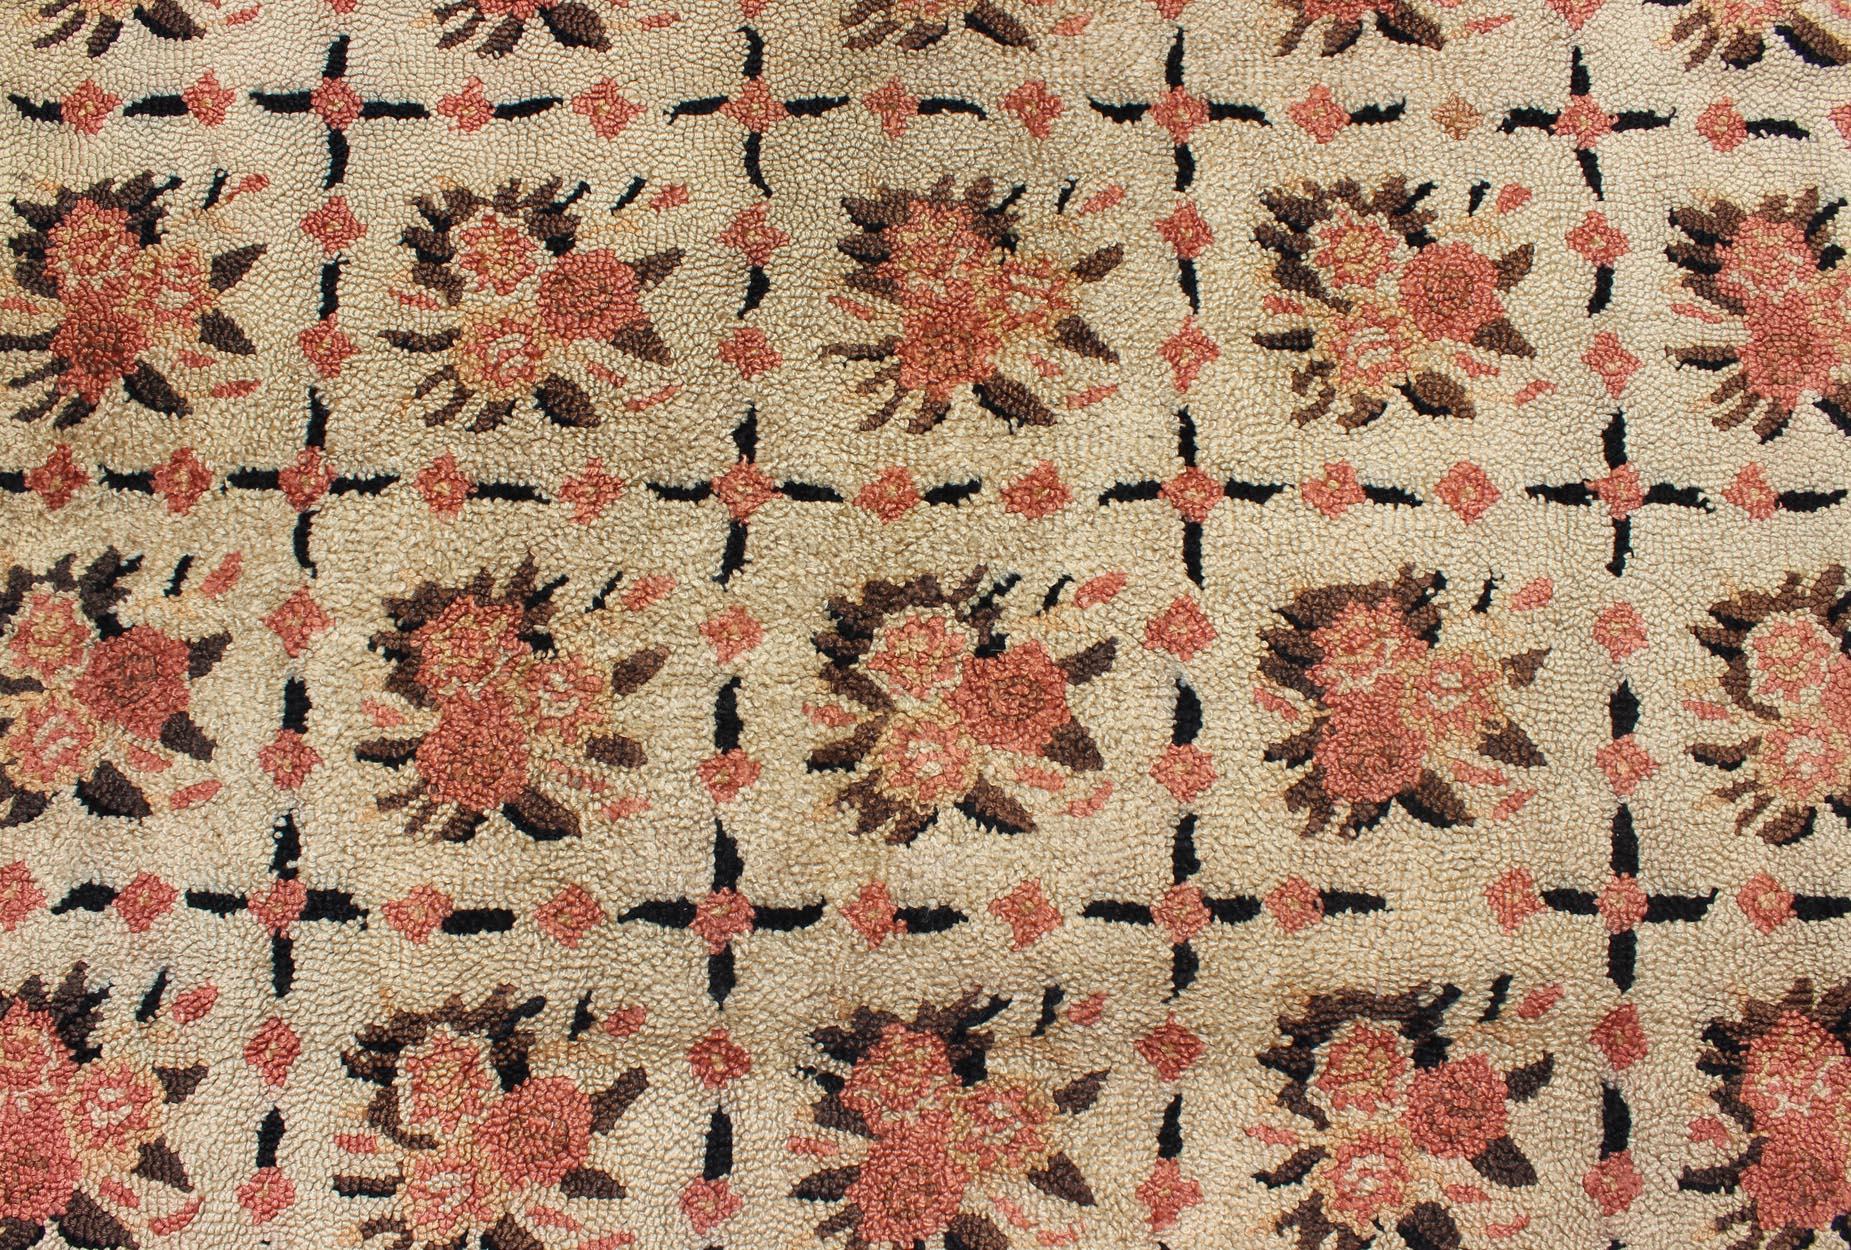 Vintage American Hooked Rug with All-Over Checkered Pattern of Floral Bouquets 1